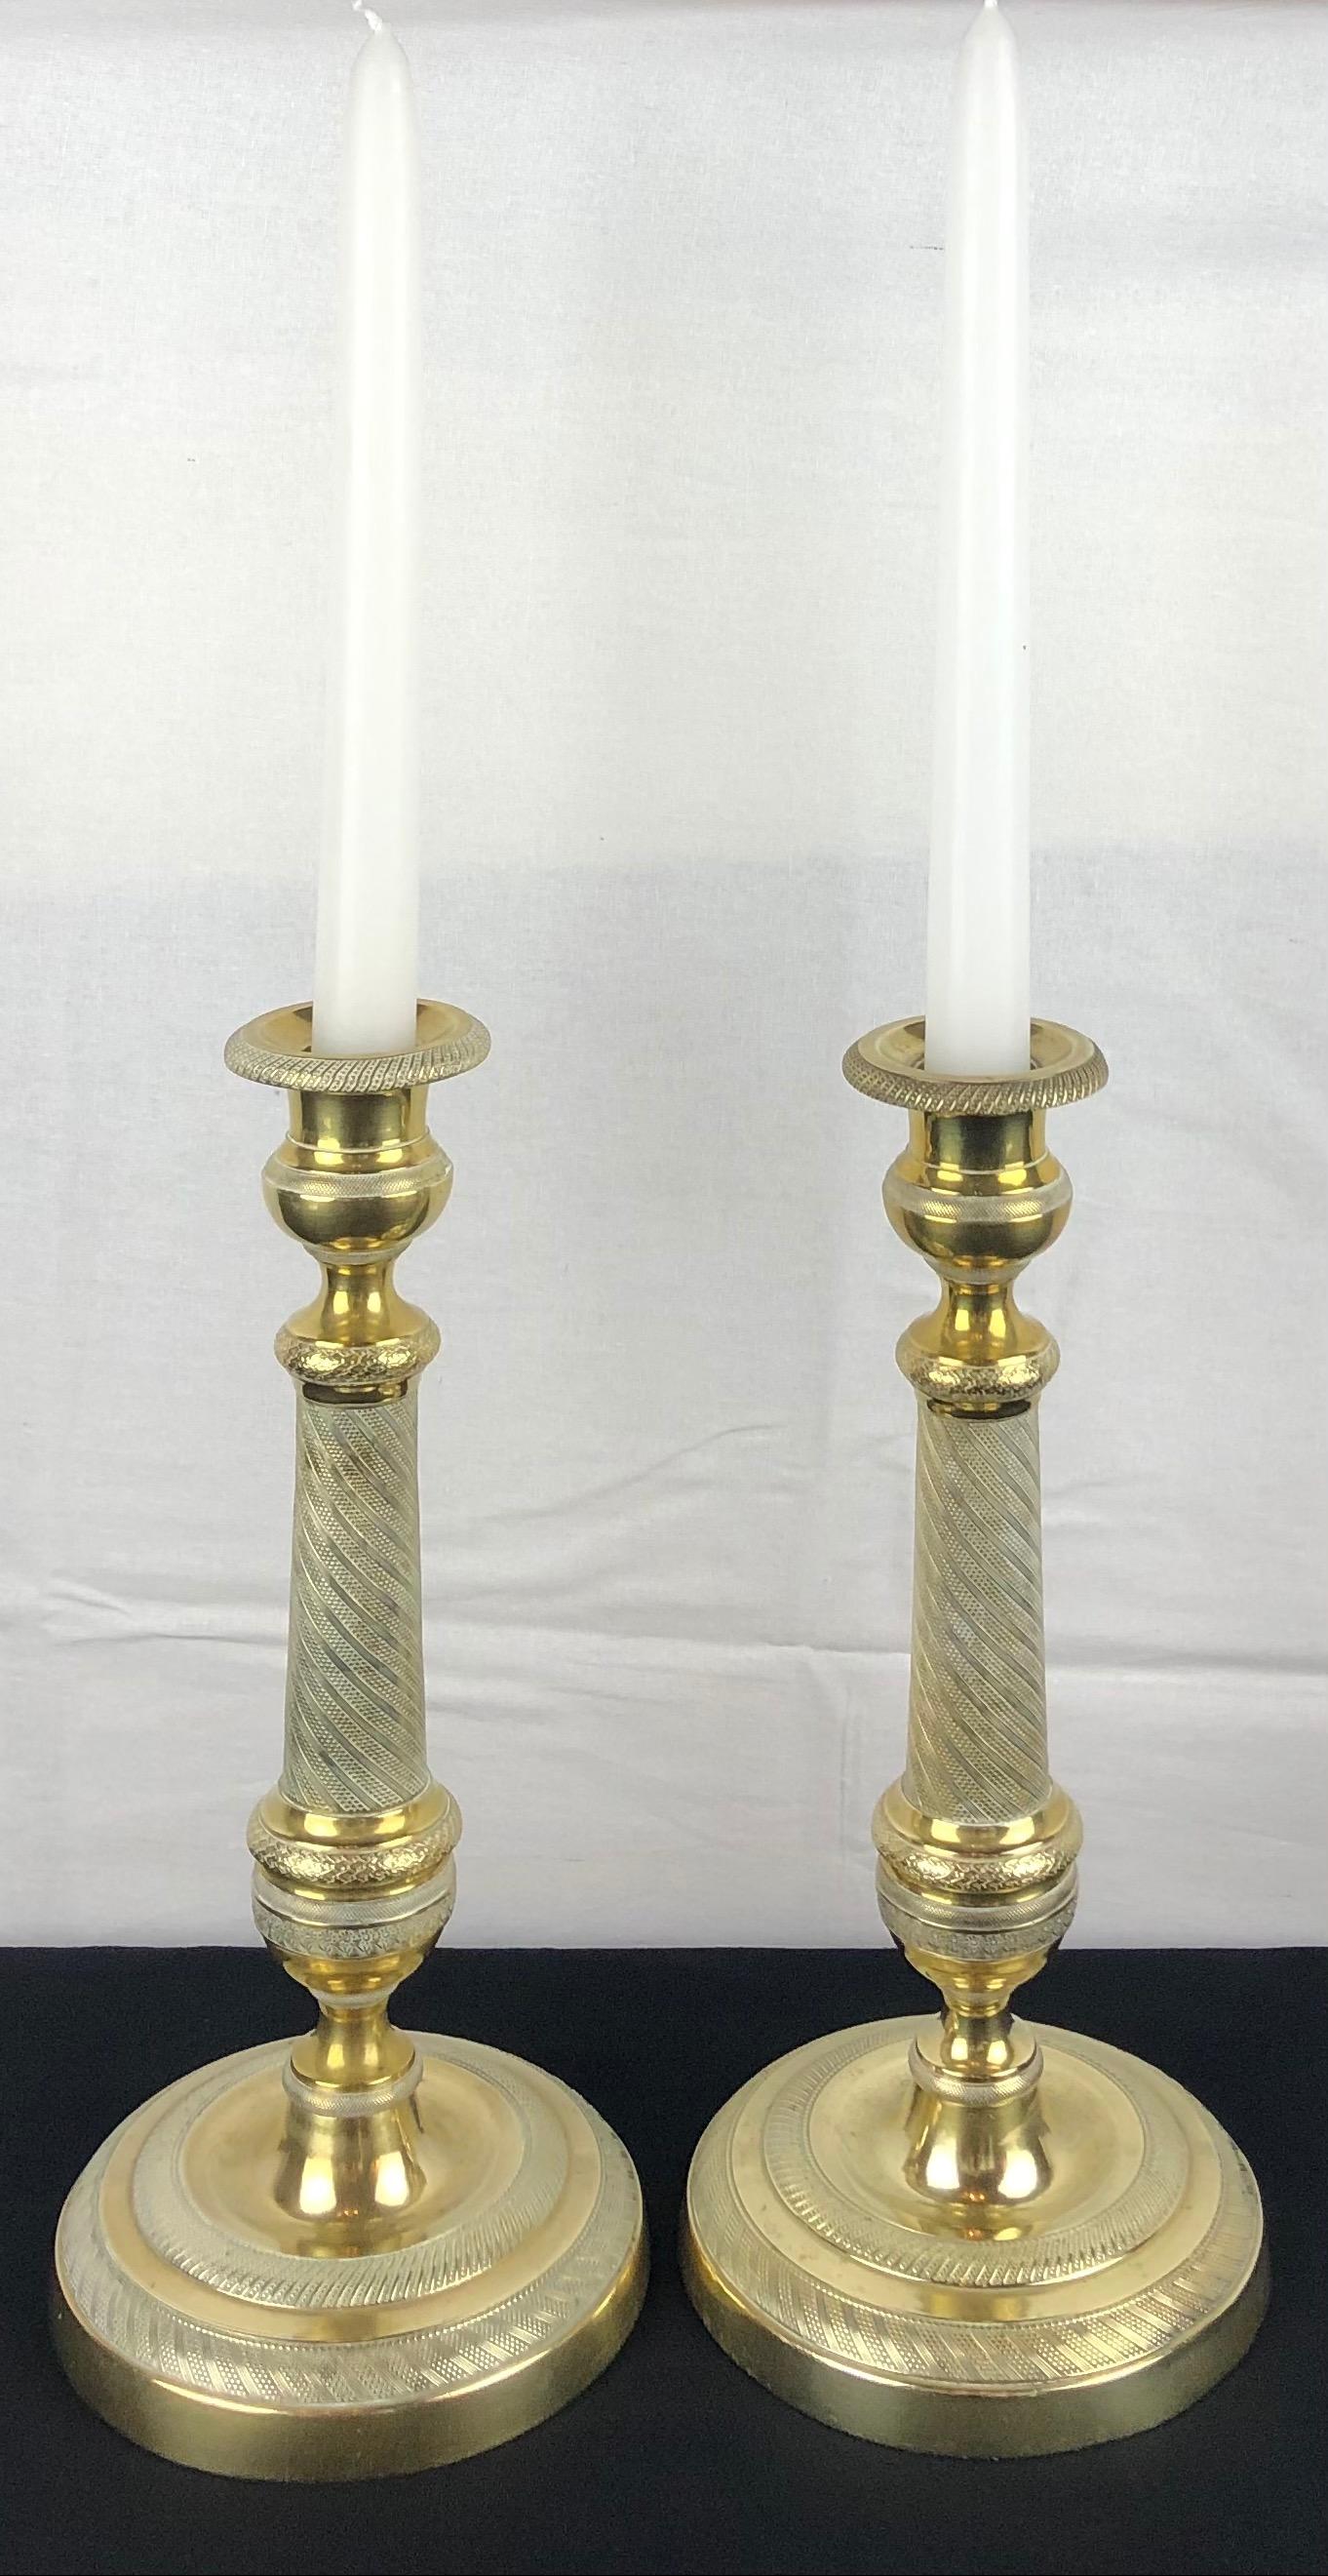 Fine Pair of Early 19th Century Empire Gilt Bronze Candlesticks For Sale 1